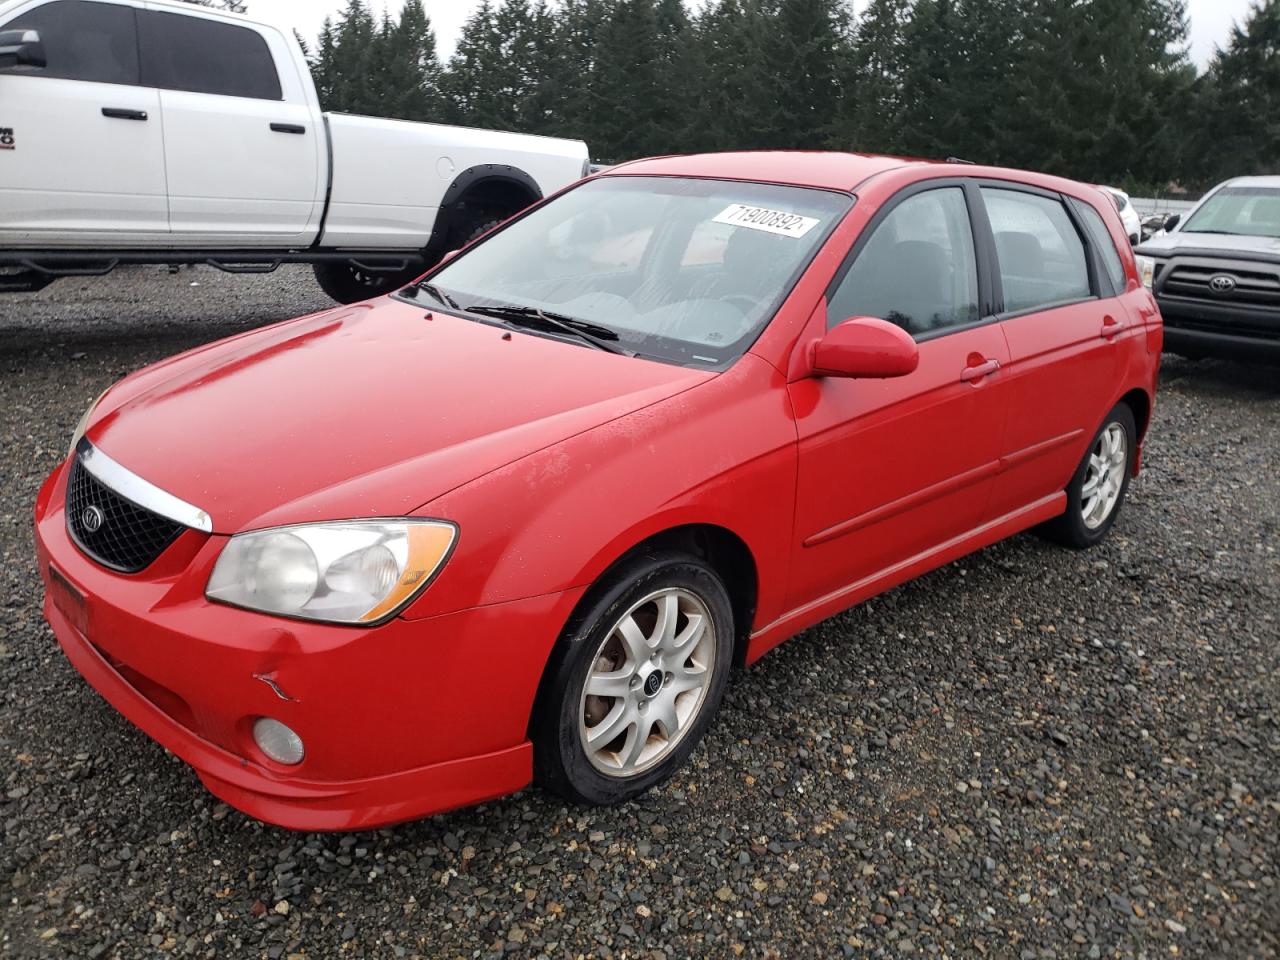 2005 KIA SPECTRA5 for sale at Copart Graham, WA Lot #71900*** |  SalvageReseller.com